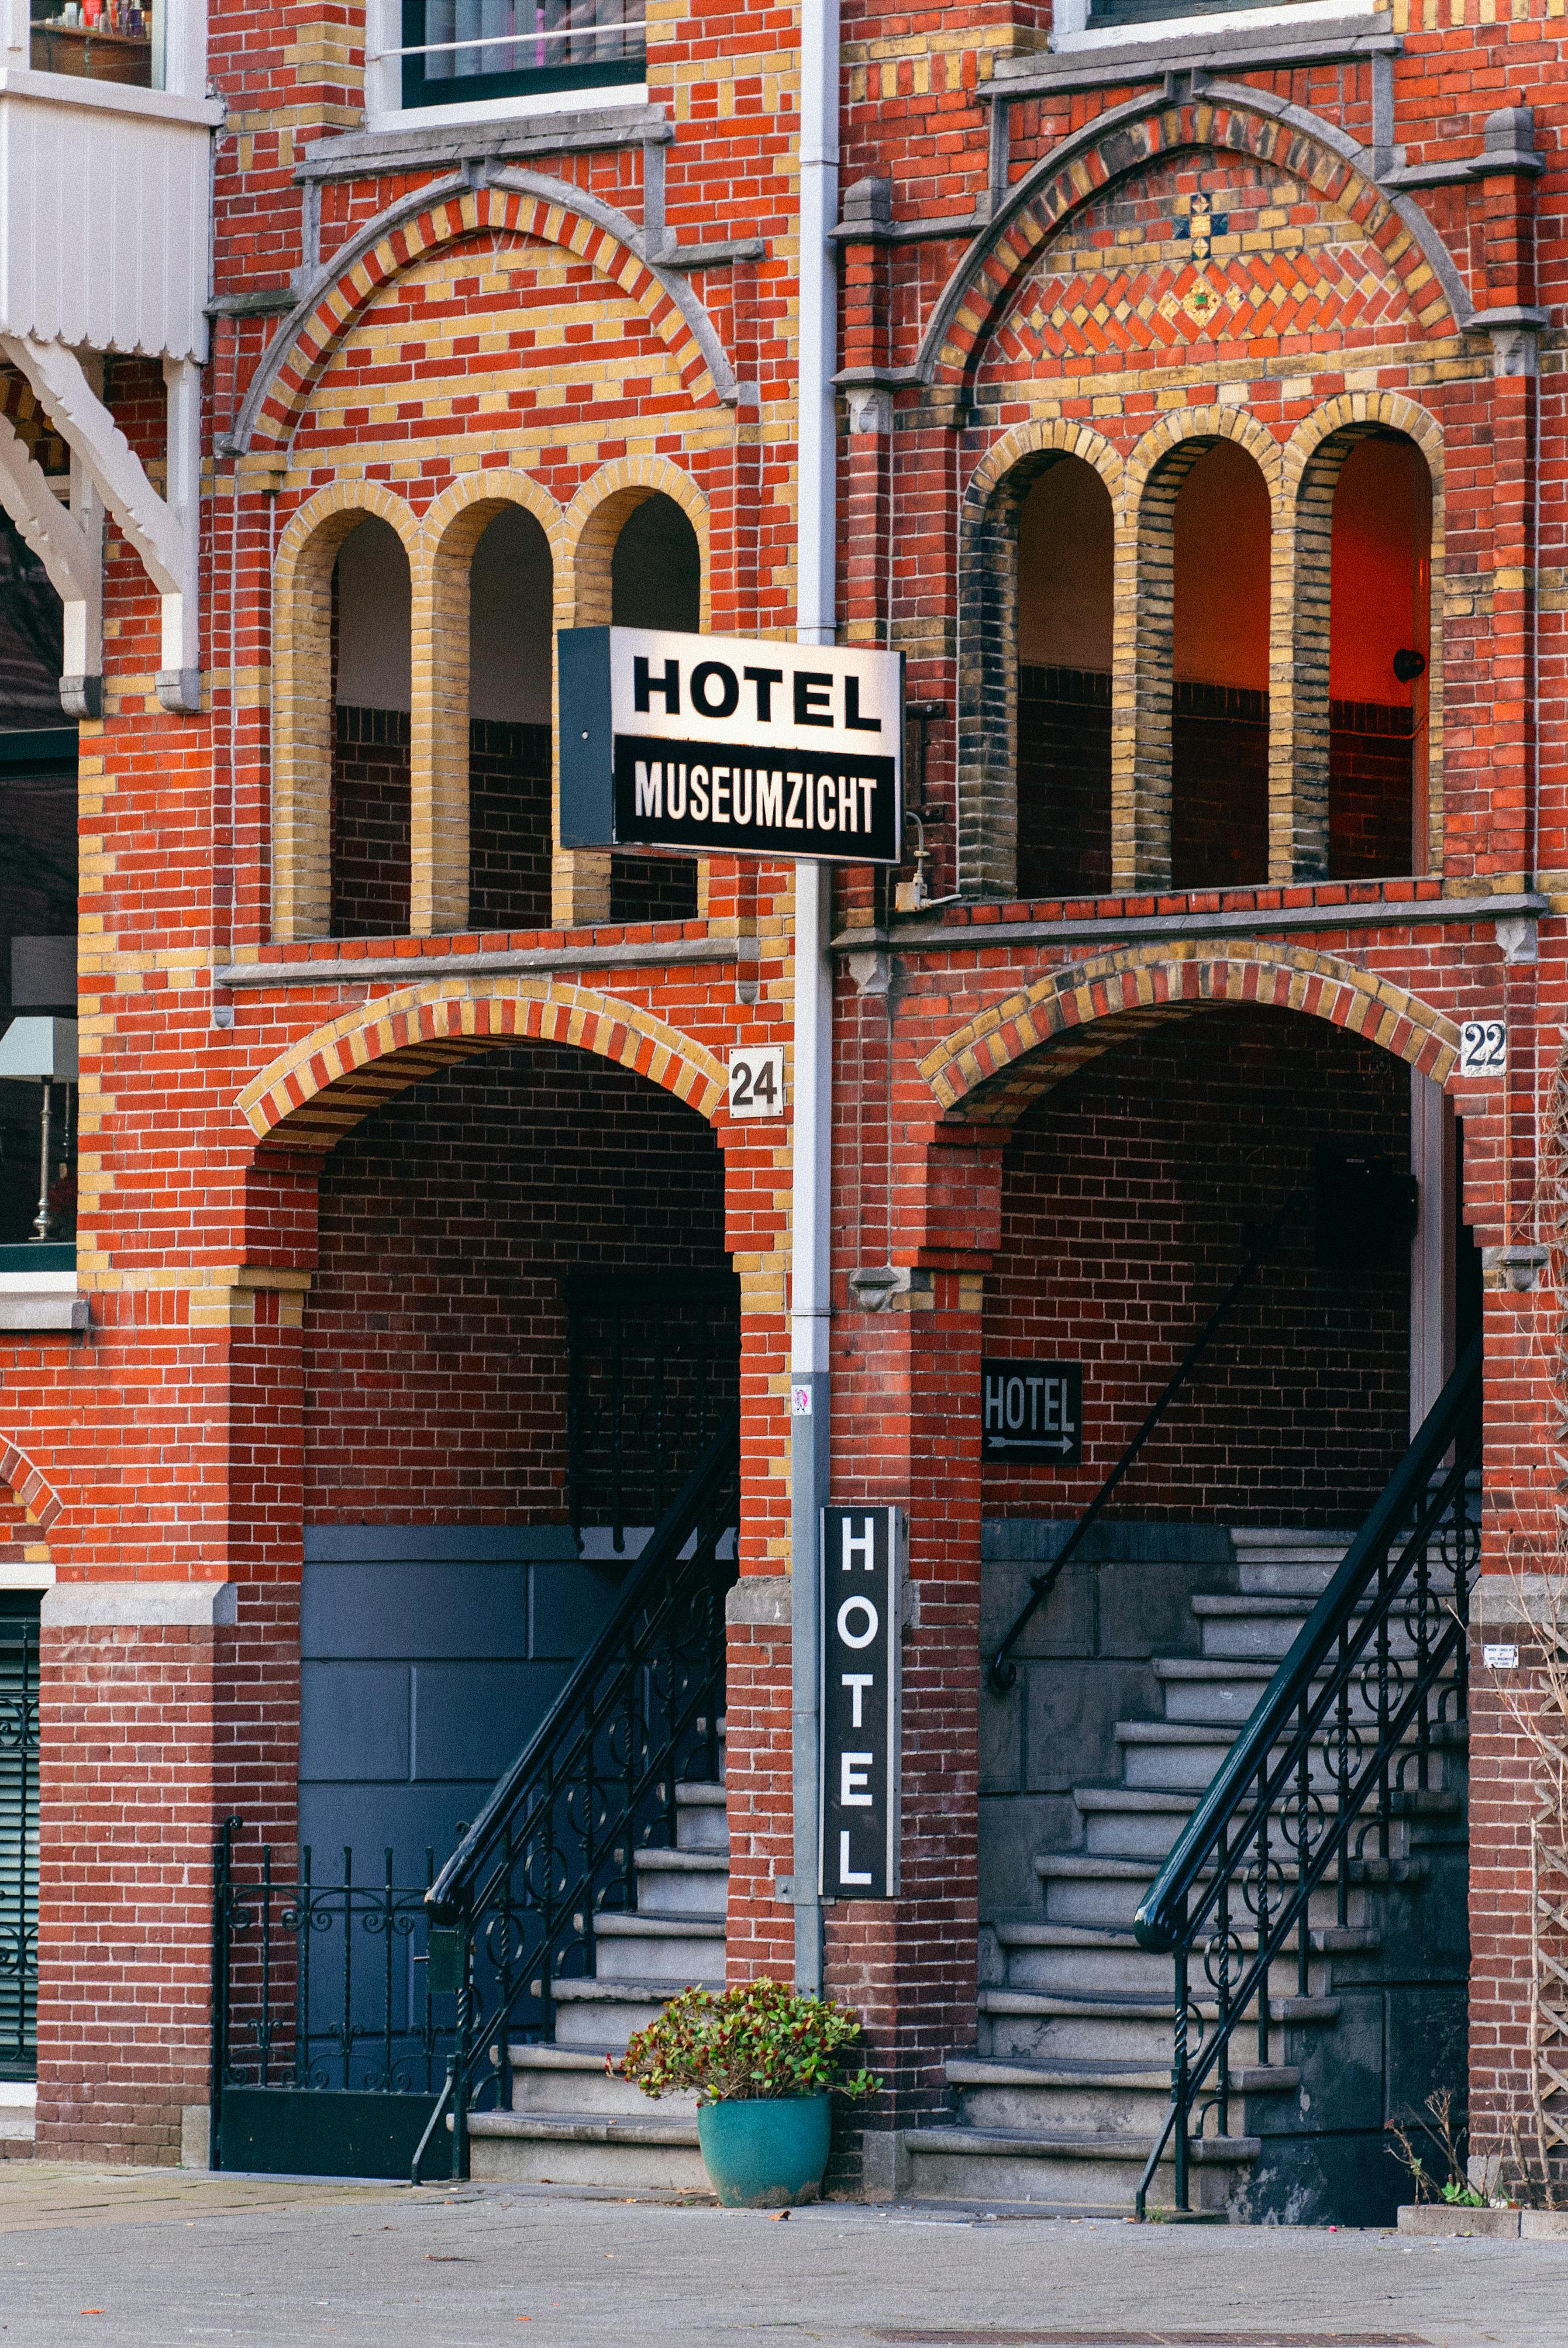 A picture of a hotel entrance | Source: Pexels